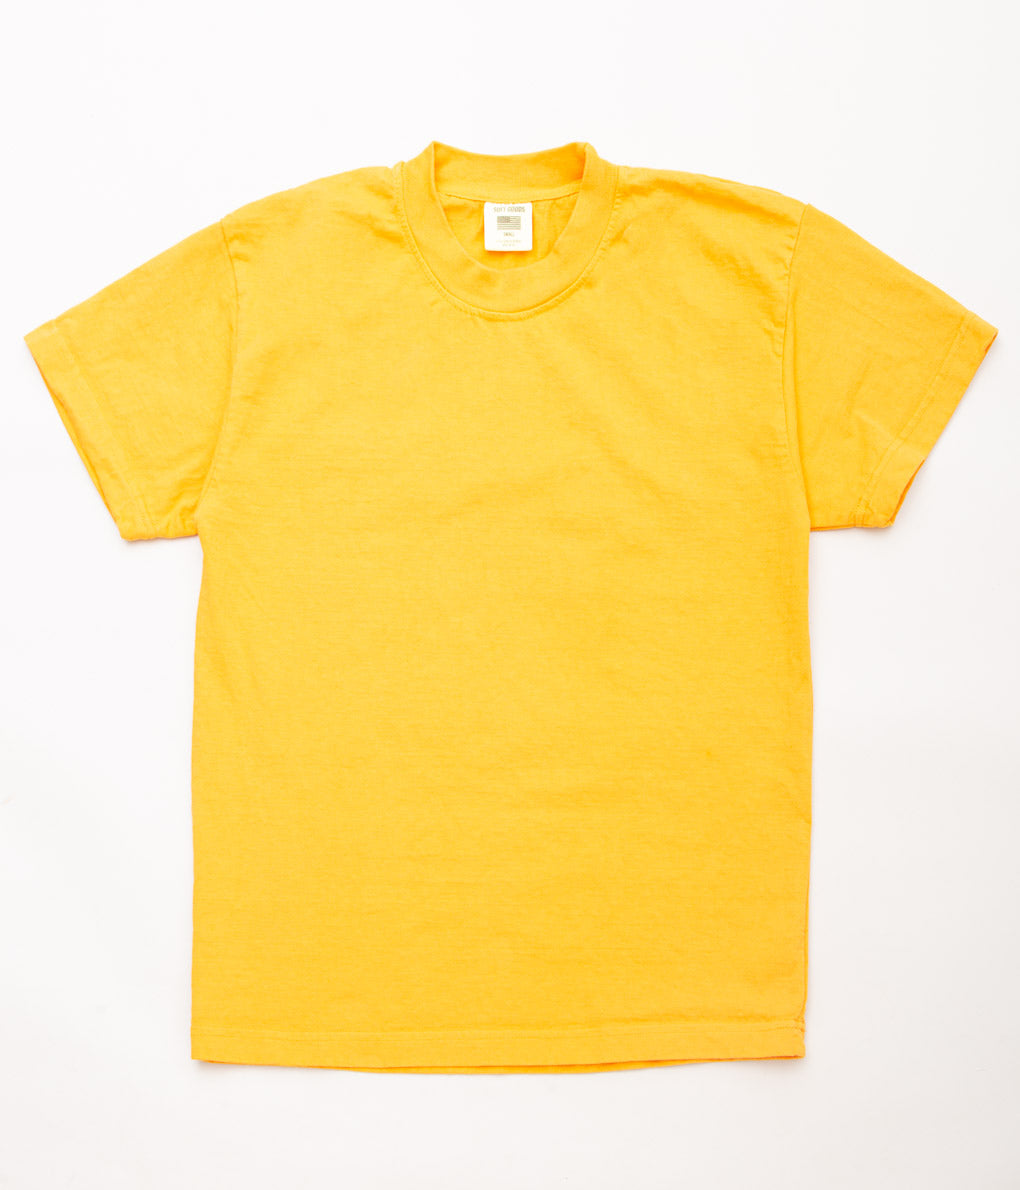 SOFT GOODS ''HEAVY WEIGHT CREWNECK TEE'' (ATHLETIC GOLD)